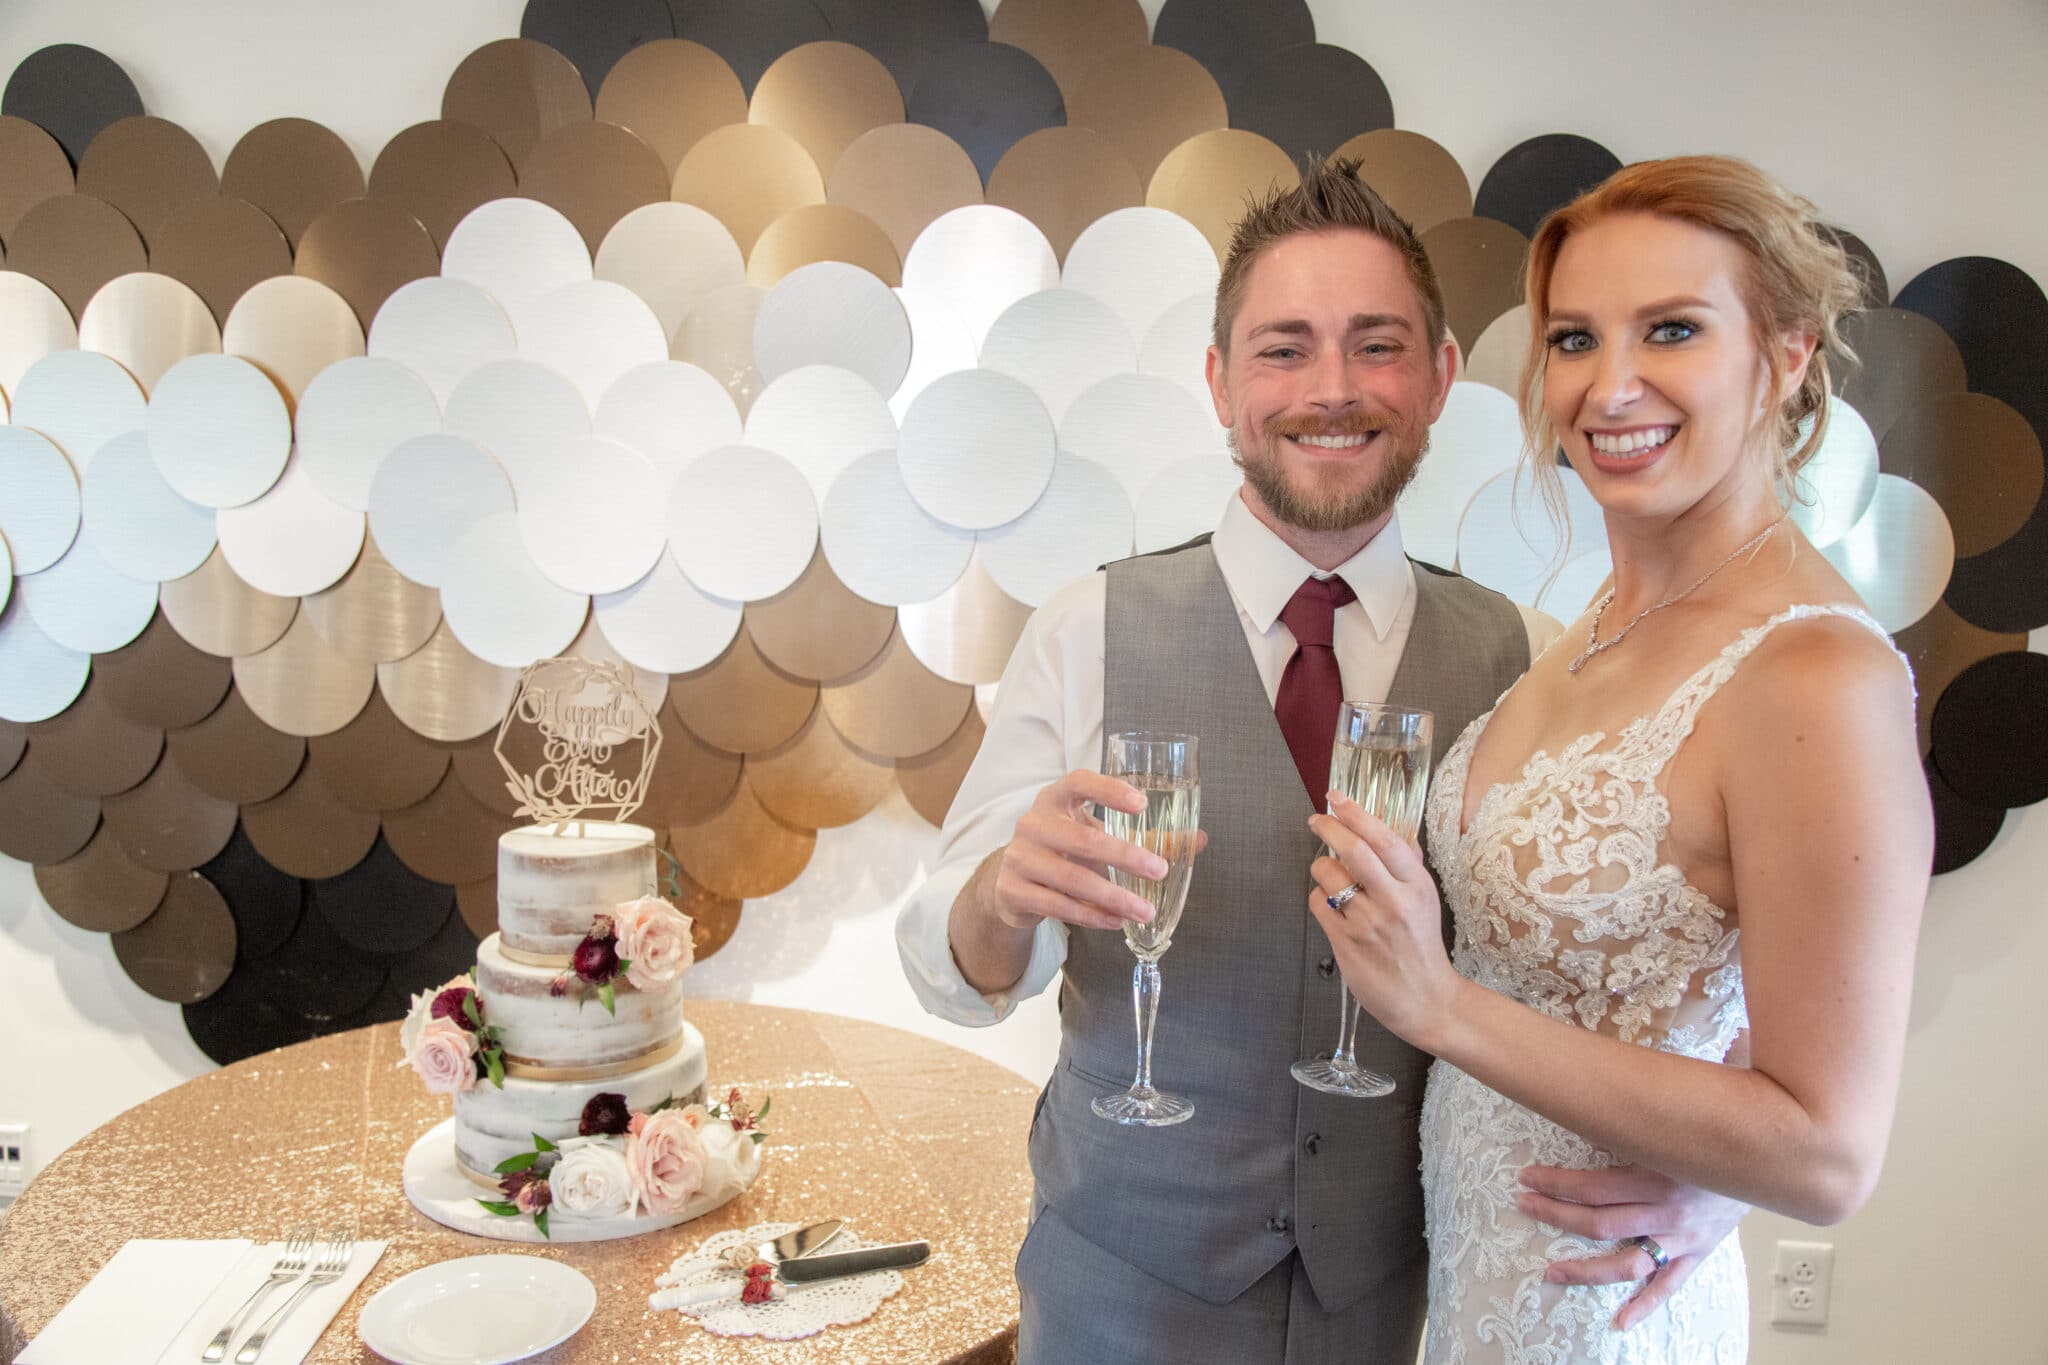 couple holding champagne glasses smiling in front of cake table and gold black and white wall decor